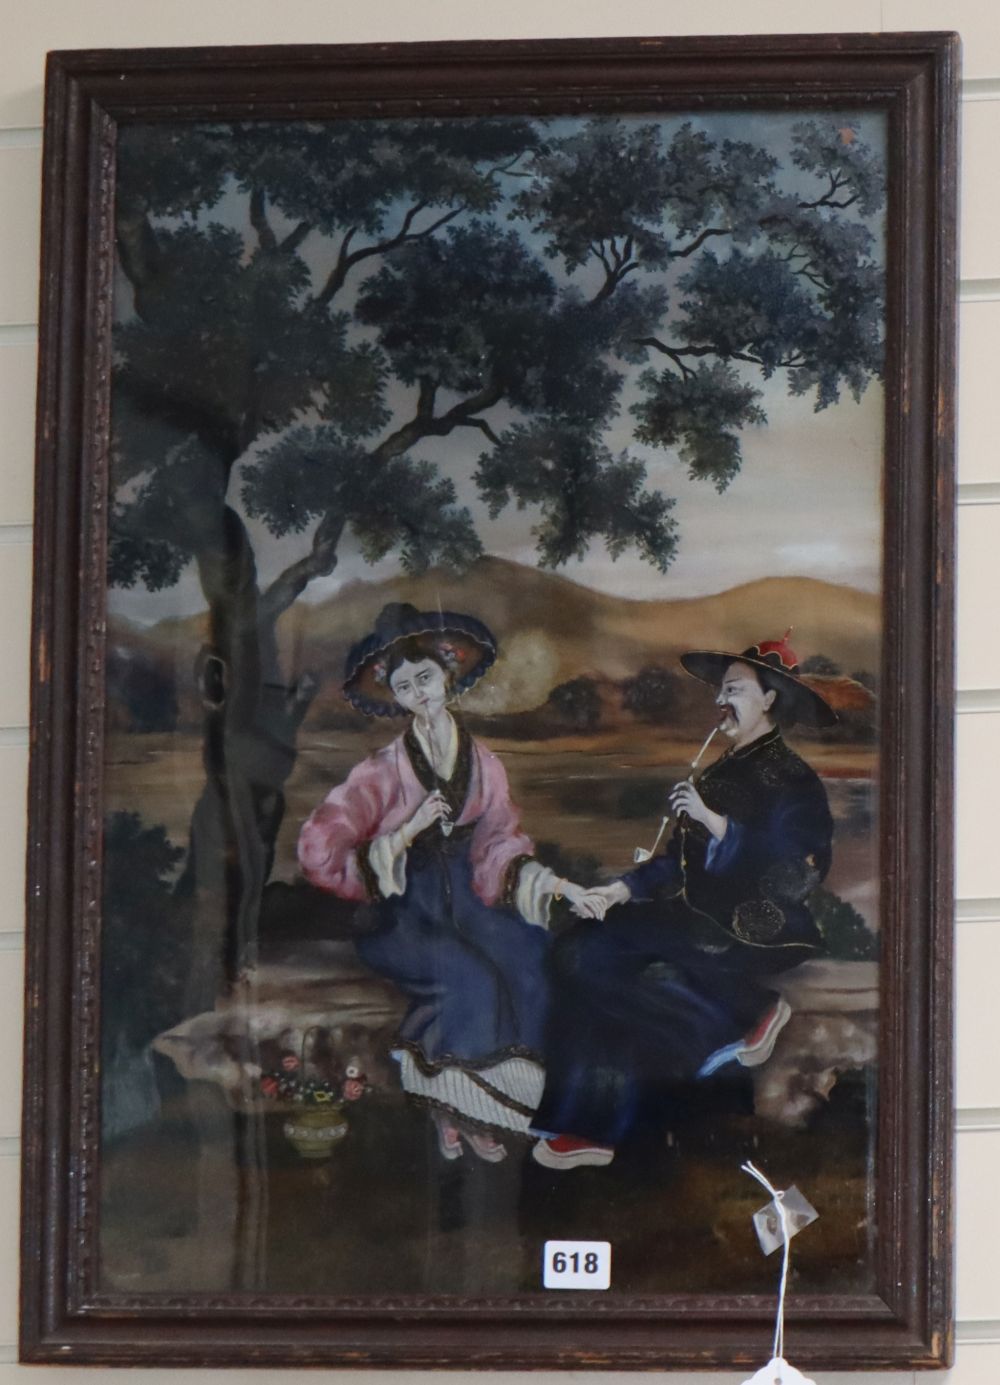 A 19th century Chinese reverse painting on glass of a lady and gentleman seated in a landscape, 56.5 x 38cm